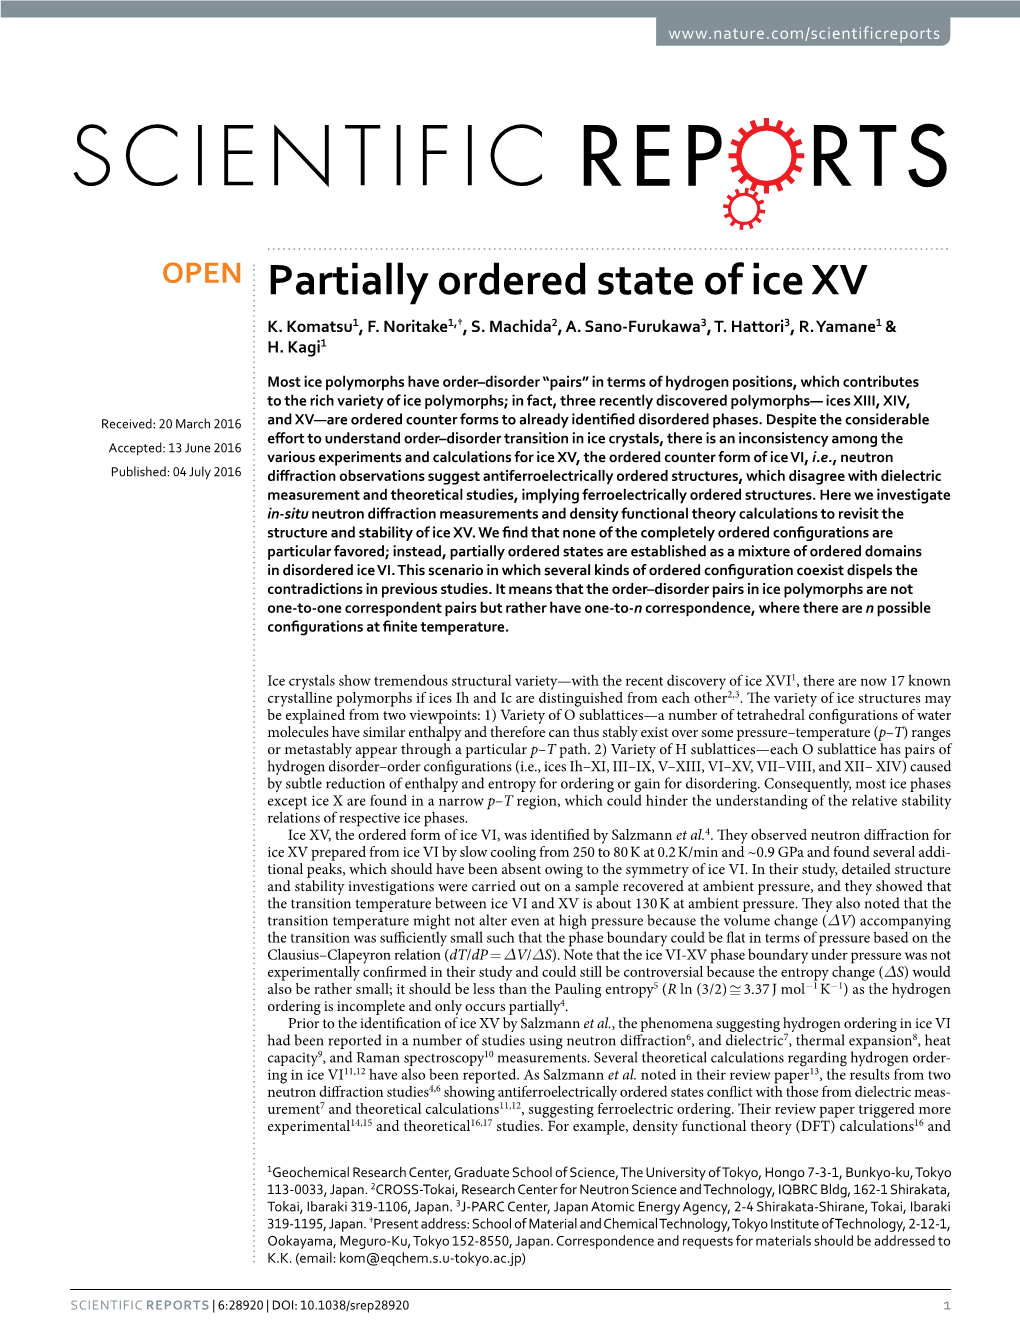 Partially Ordered State of Ice XV K